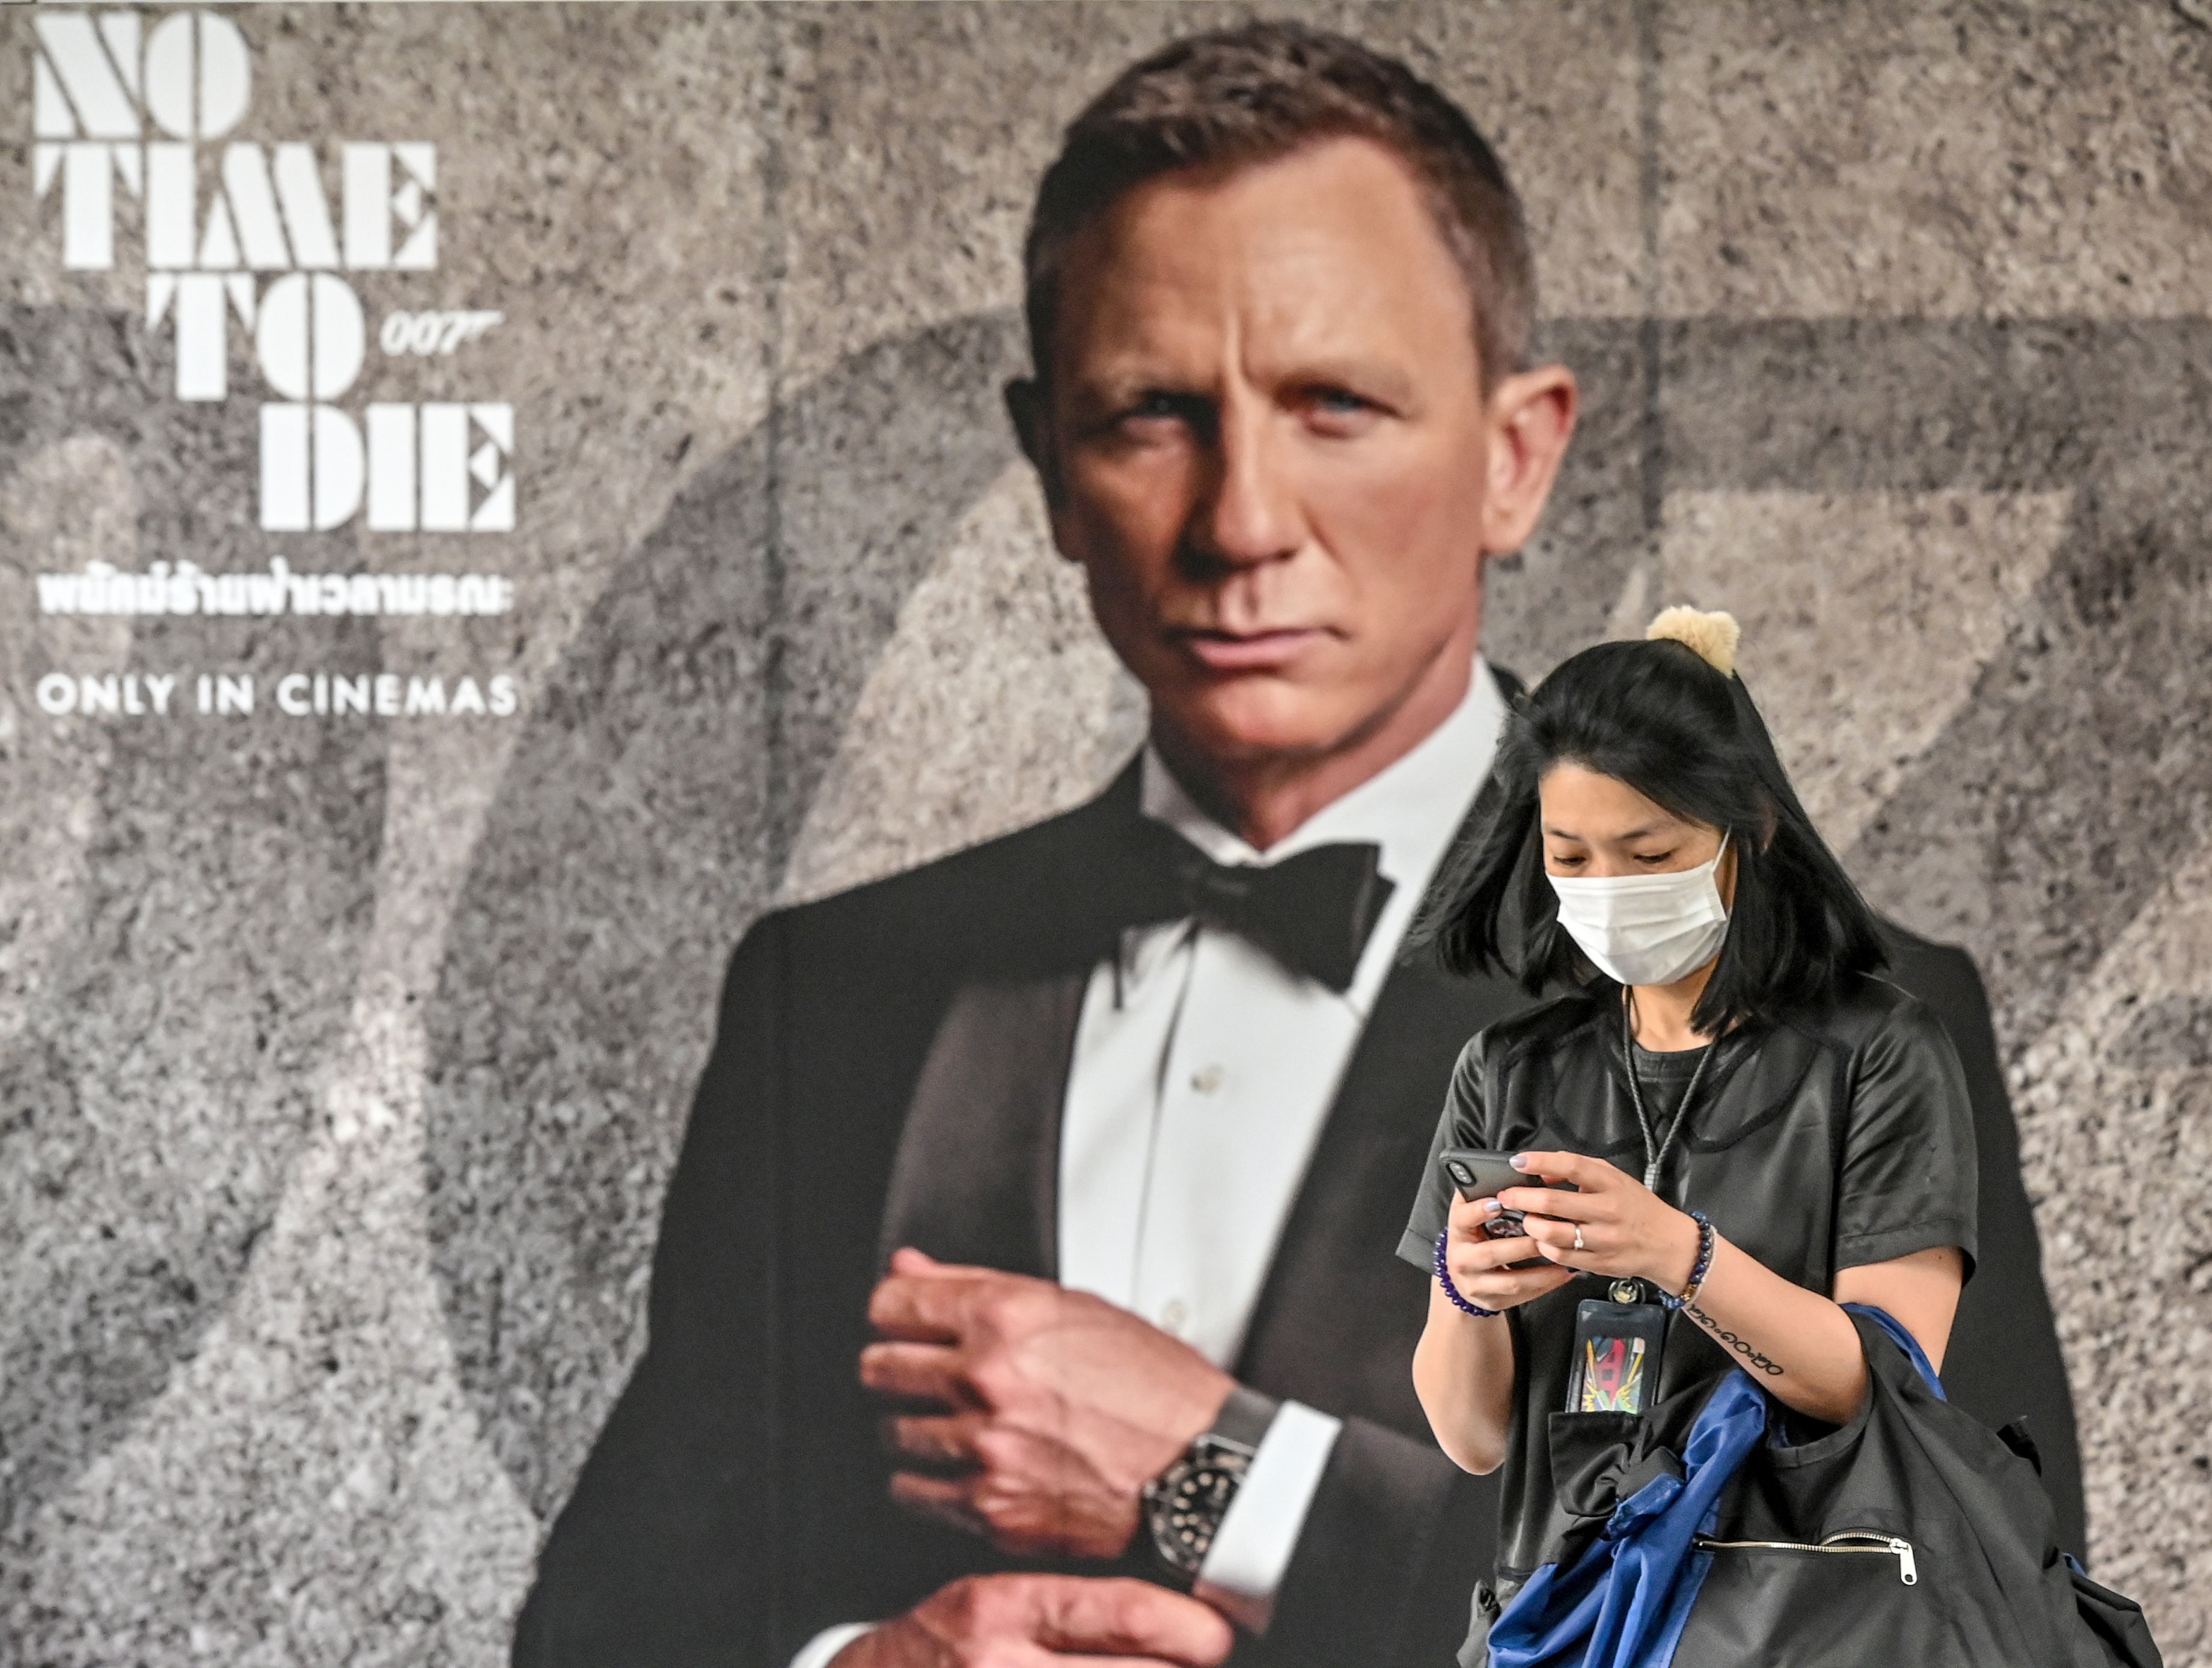 A woman wearing a facemask amid fears of the spread of the COVID-19 novel coronavirus walks past a poster for the new James Bond movie &quot;No Time to Die&quot; in Bangkok on February 28, 2020.